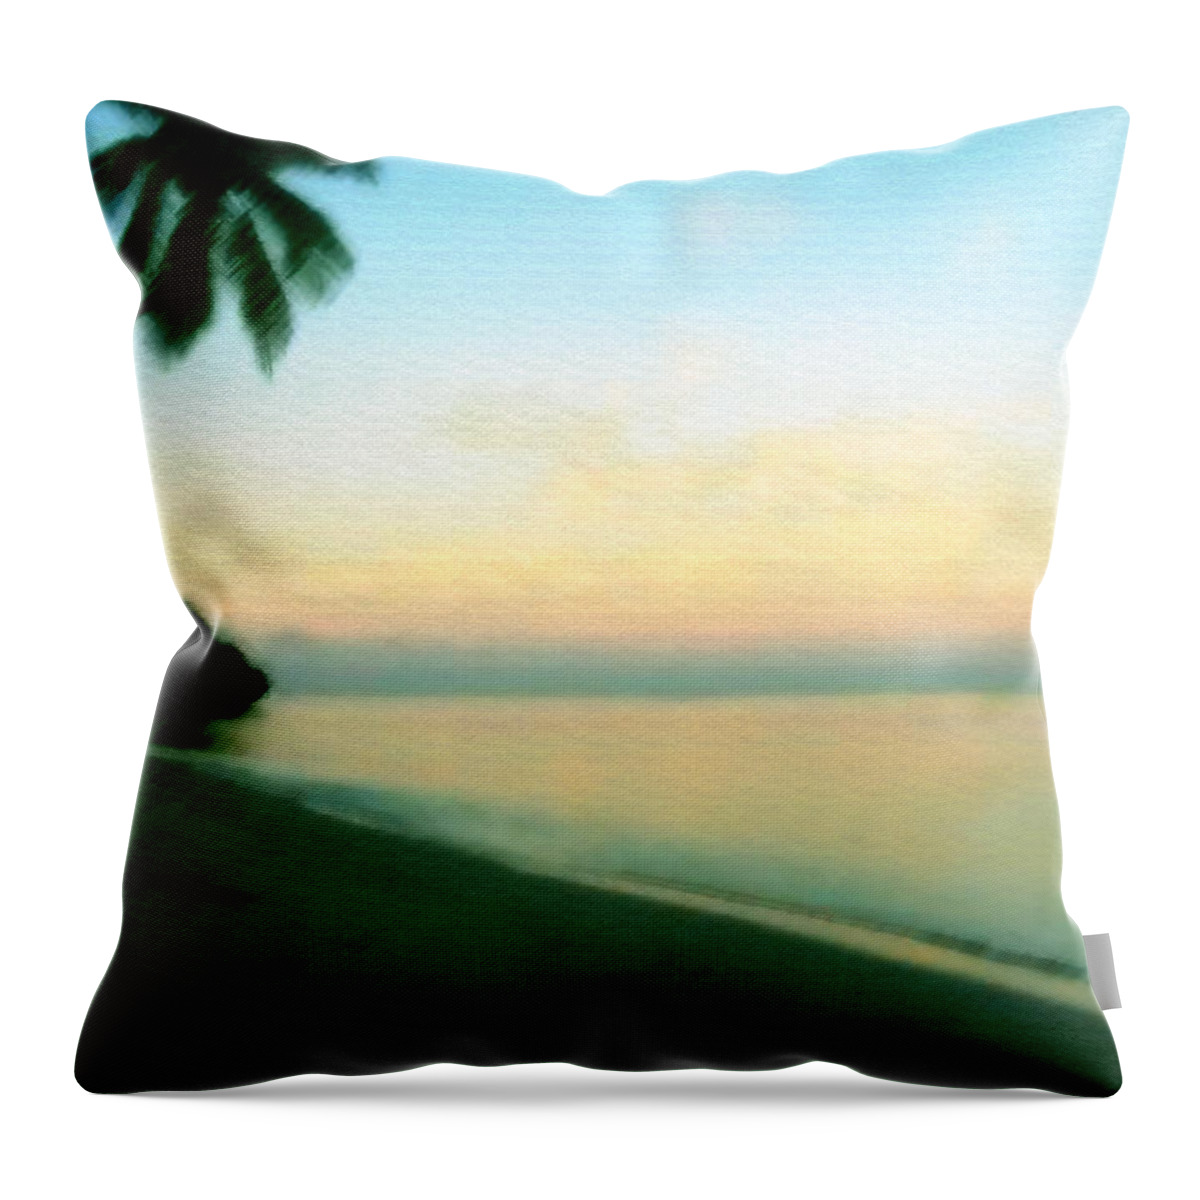 Seascape Throw Pillow featuring the digital art Fiji Calling by Saad Hasnain